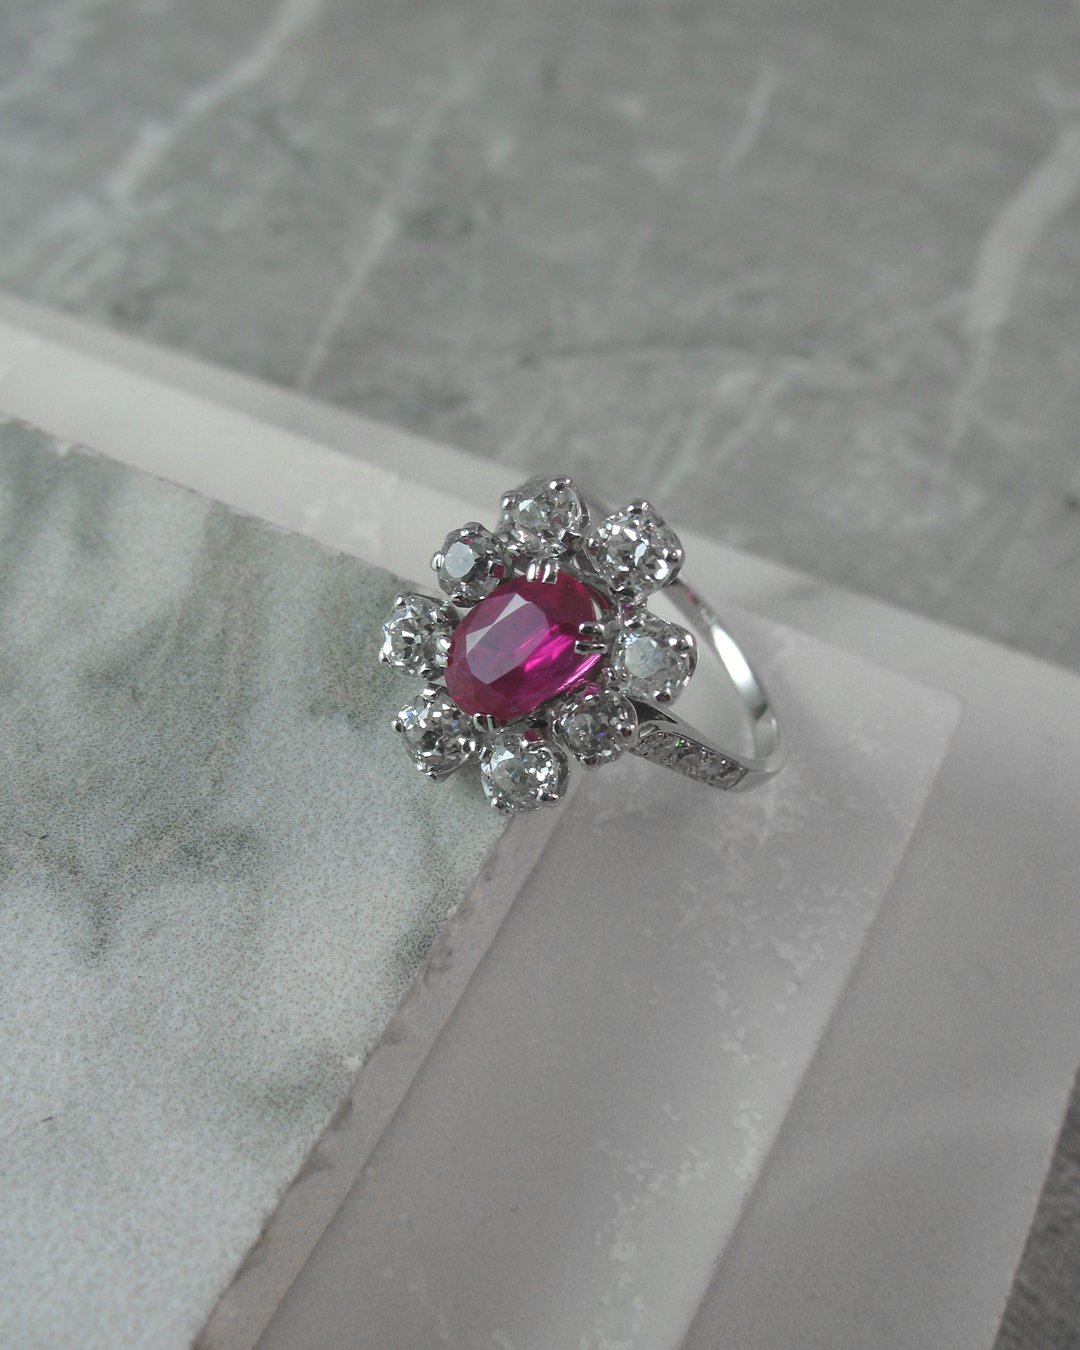 A vintage inspired diamond and French ruby ring